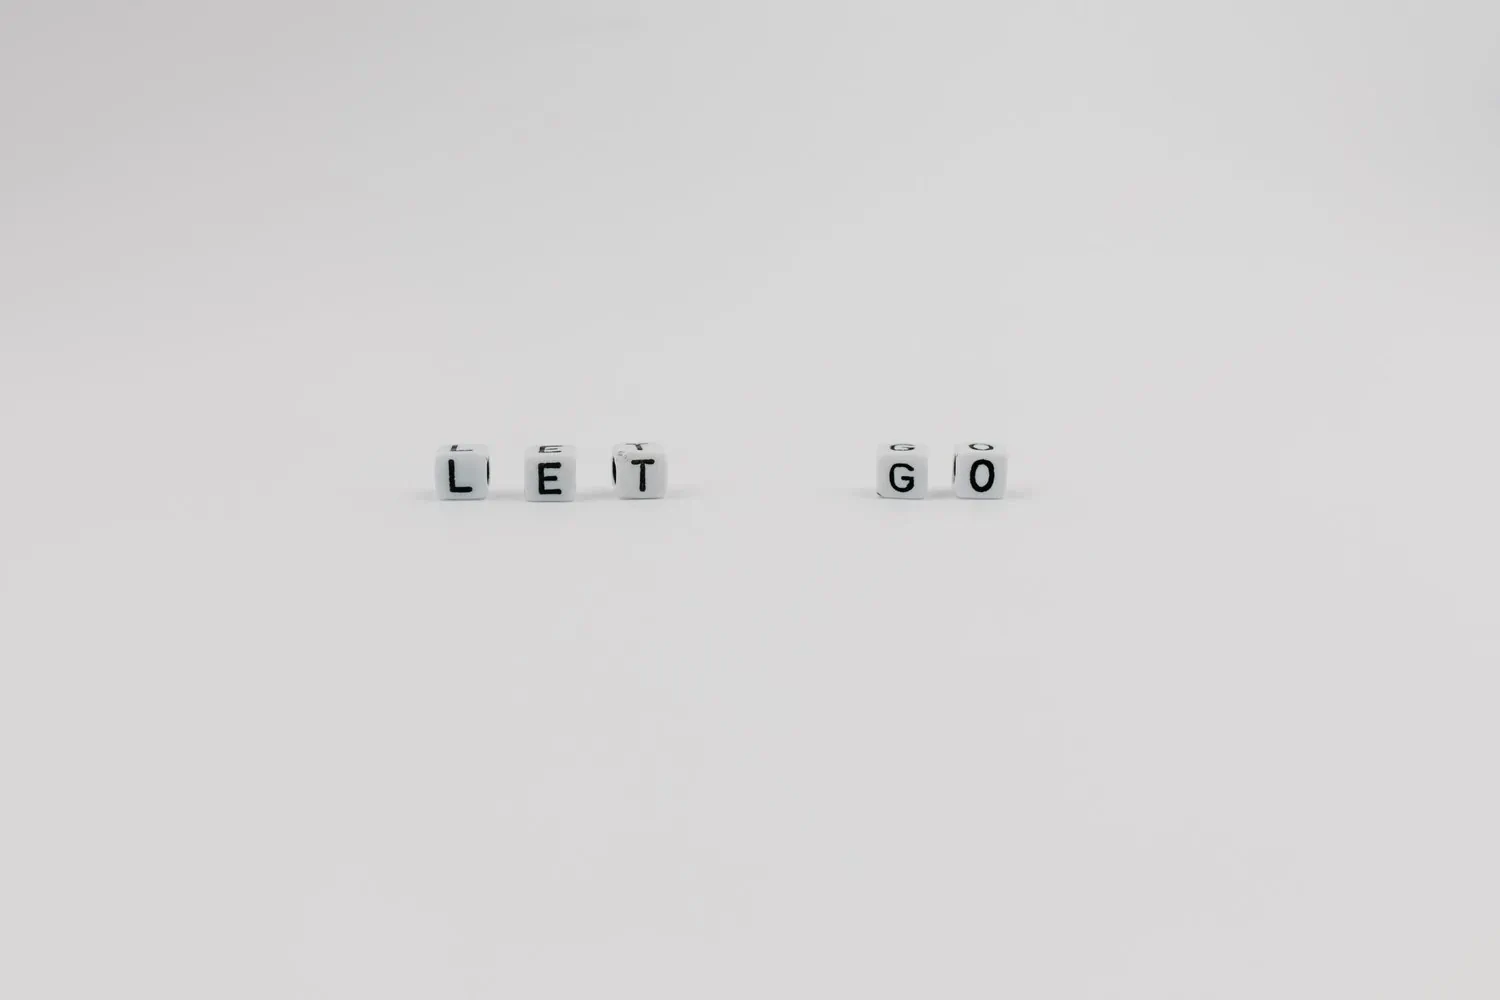 Letters writing out let go which is a message for those researching how to break emotional attachment to things